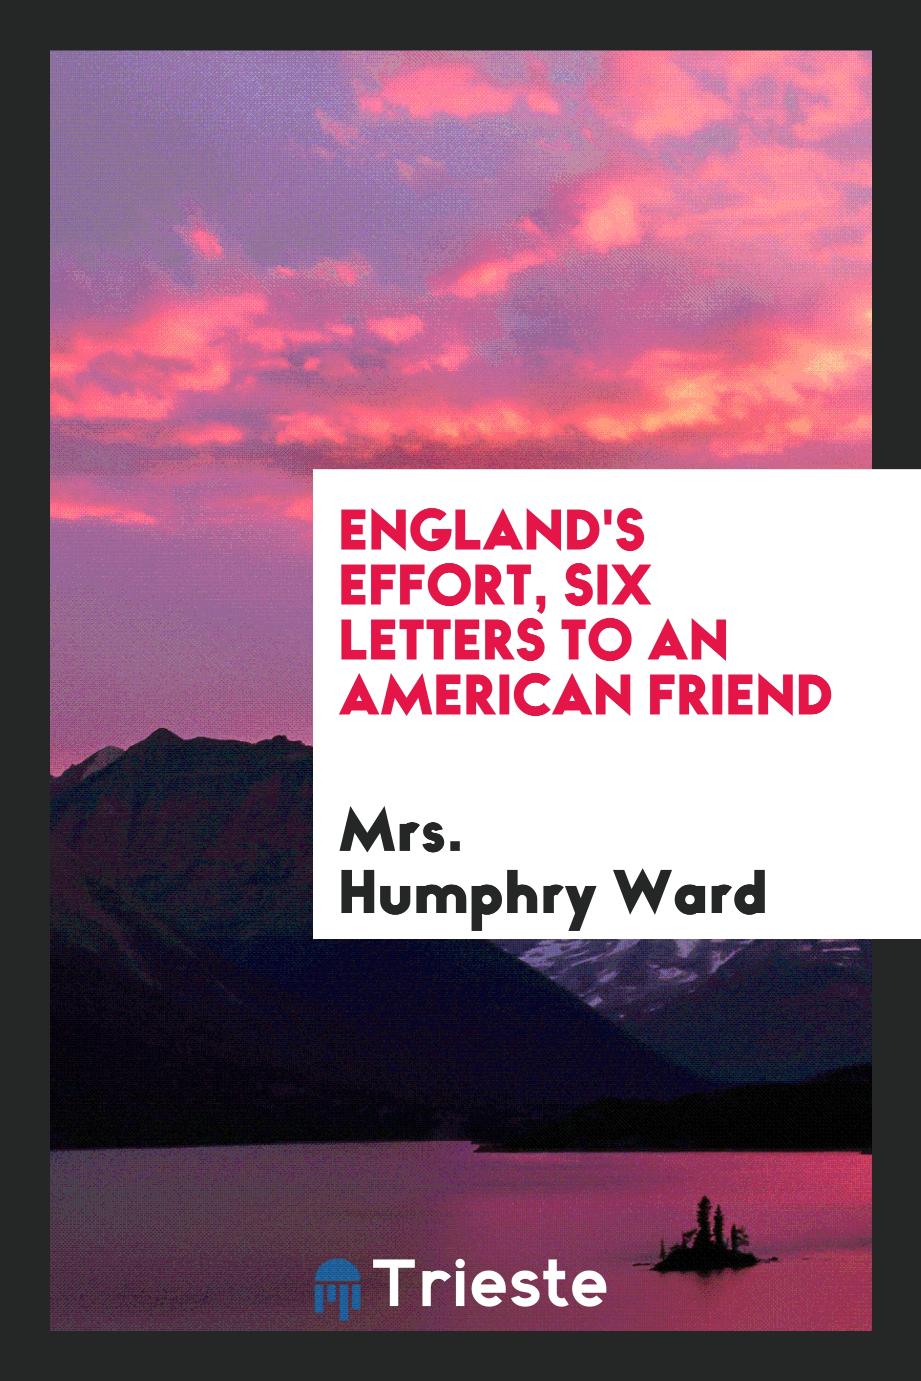 England's effort, six letters to an American friend